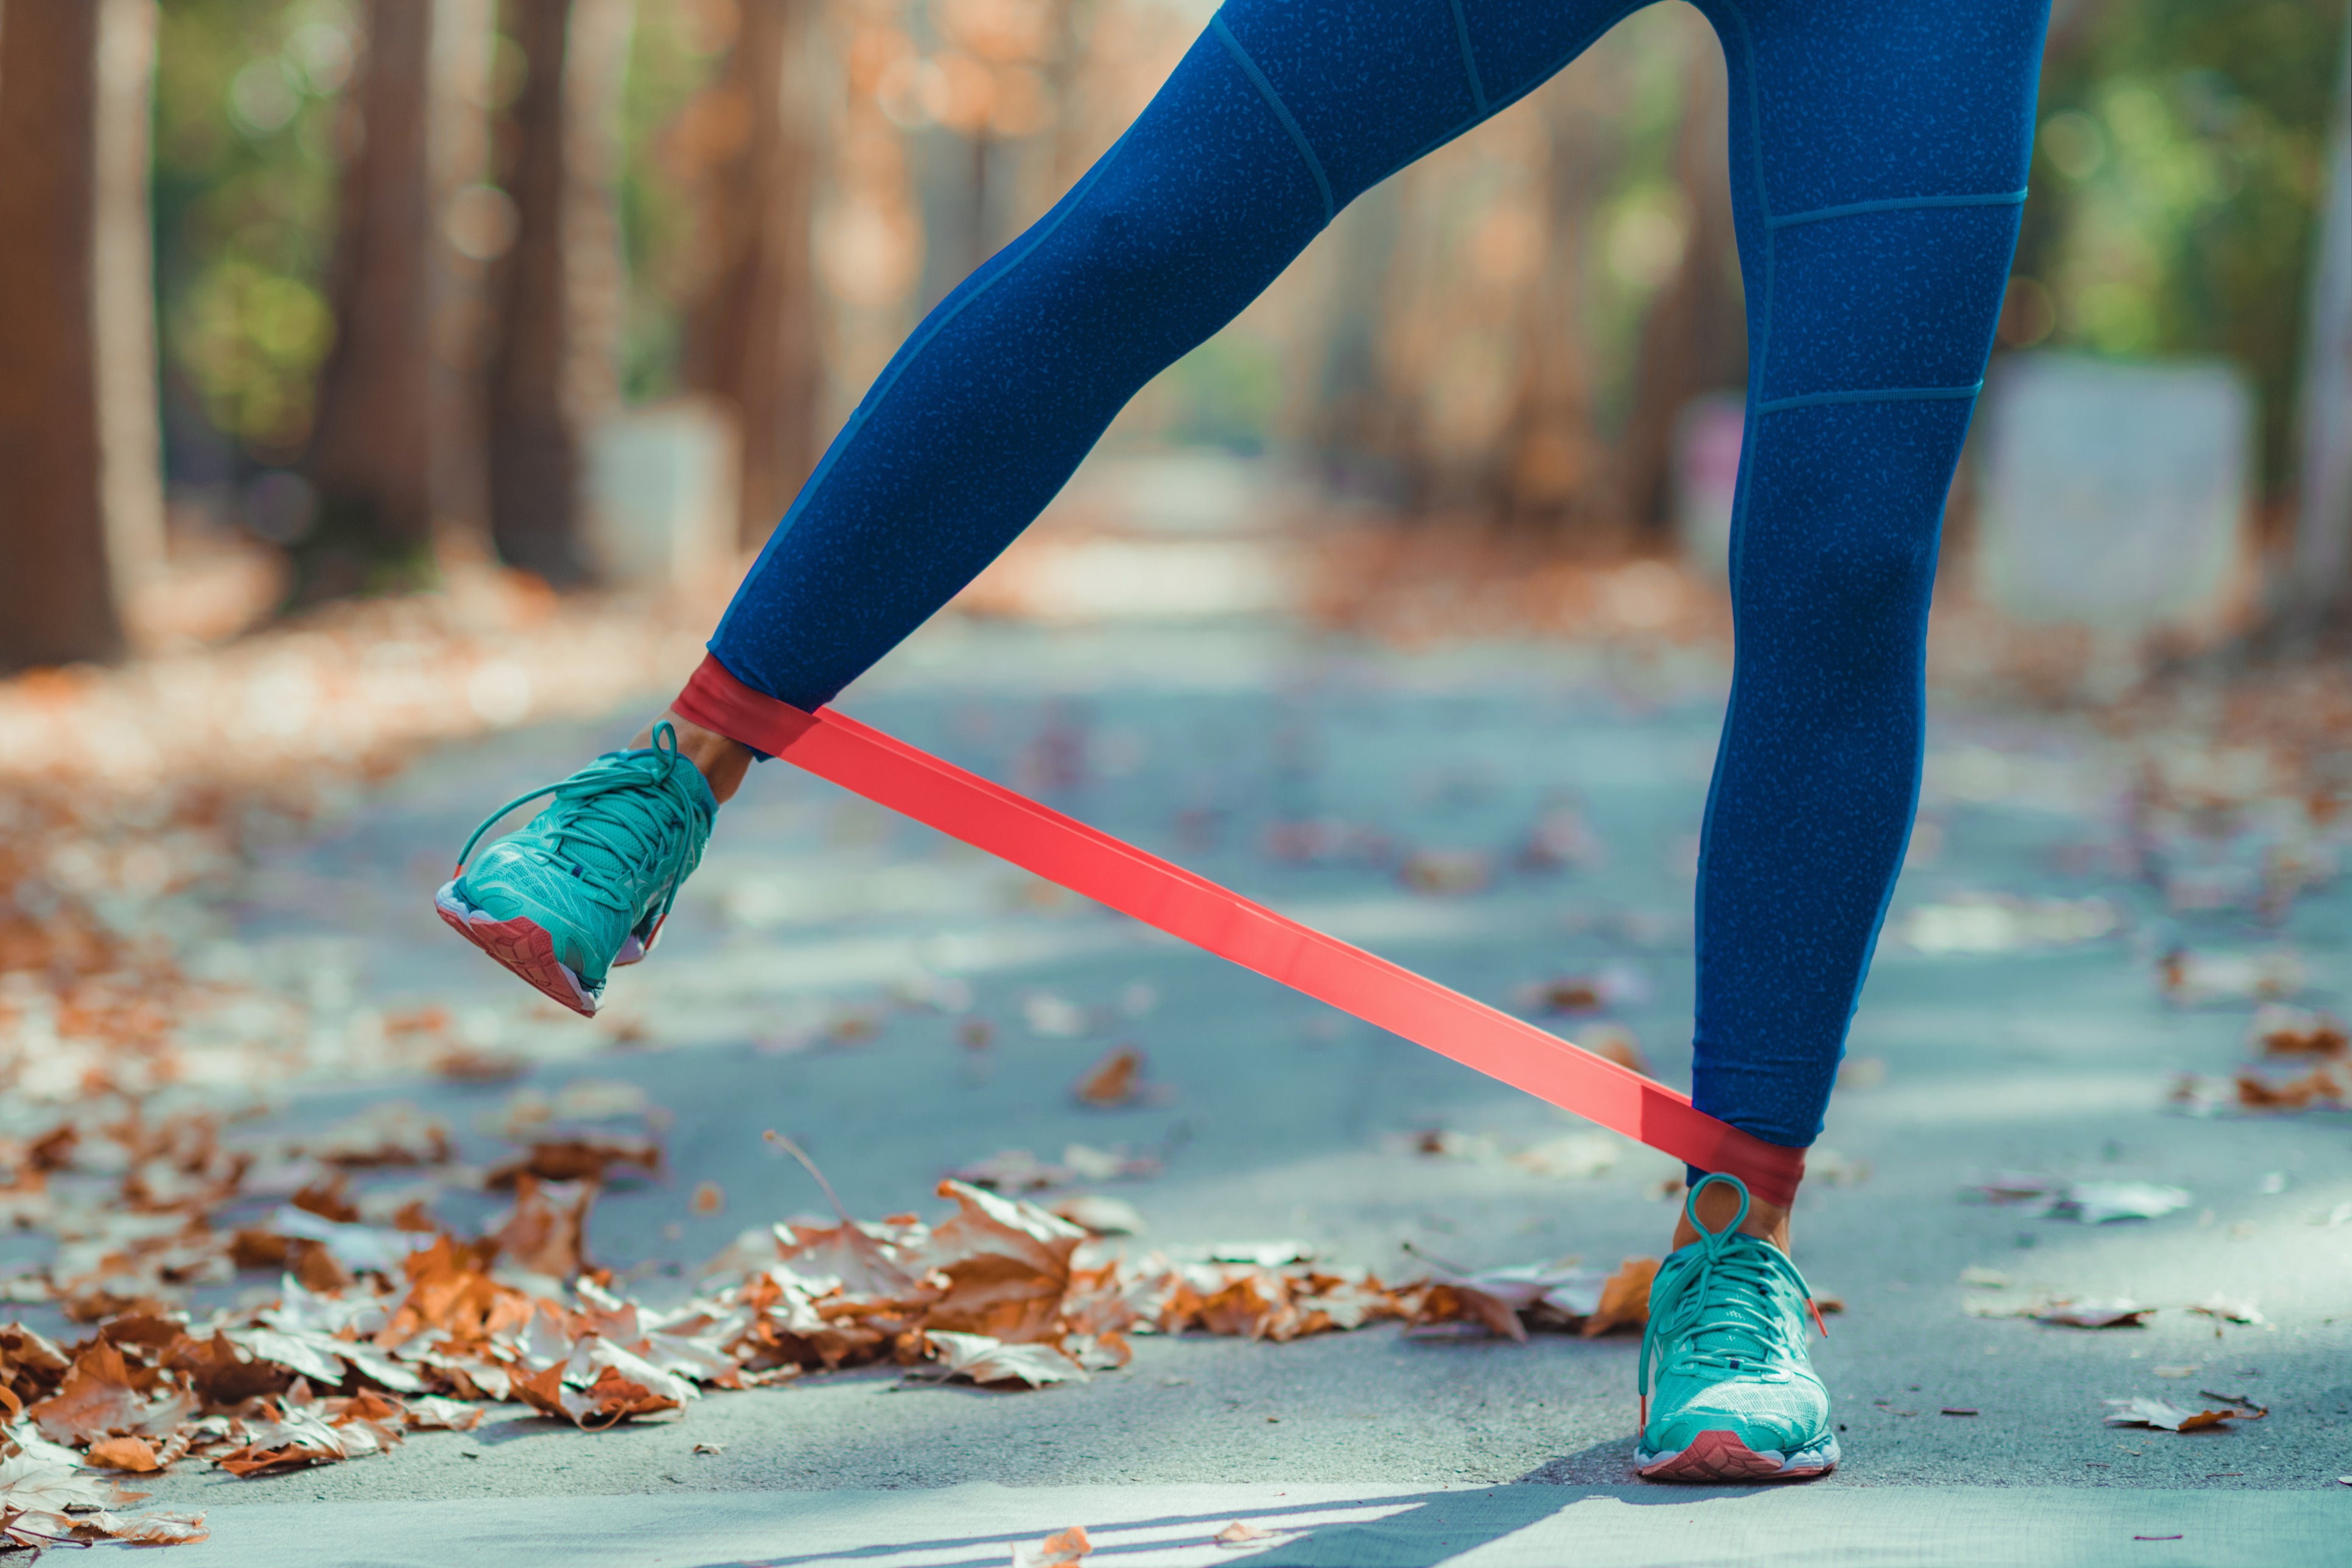 Resistance band workouts are everywhere – but are they any good